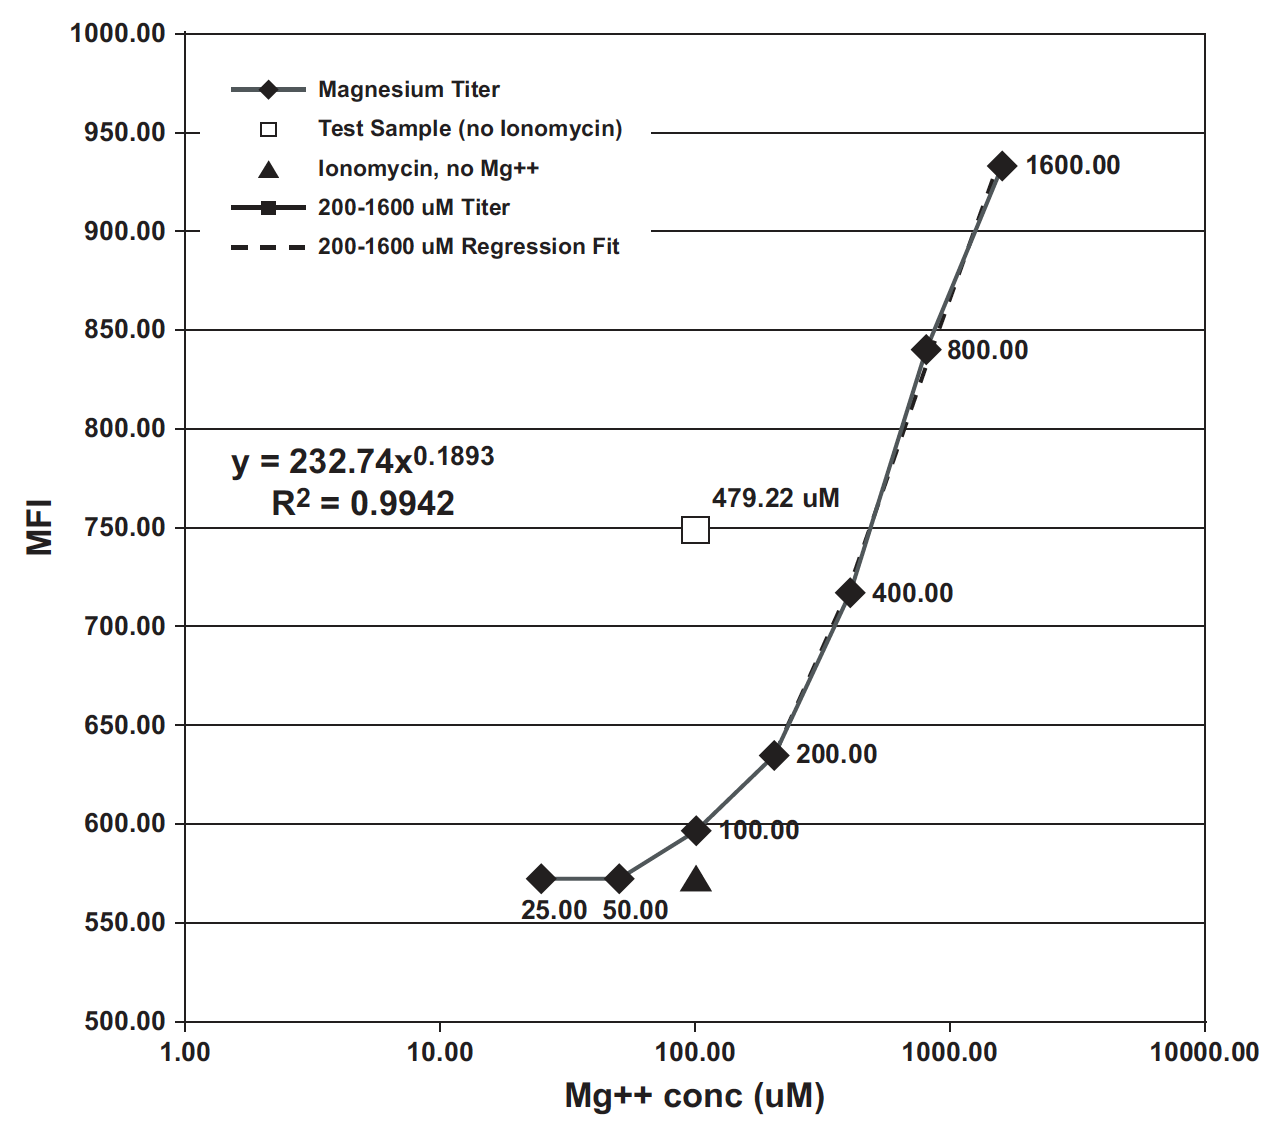 Rapid calculation of the intracellular magnesium in flow cytometry assay measurements